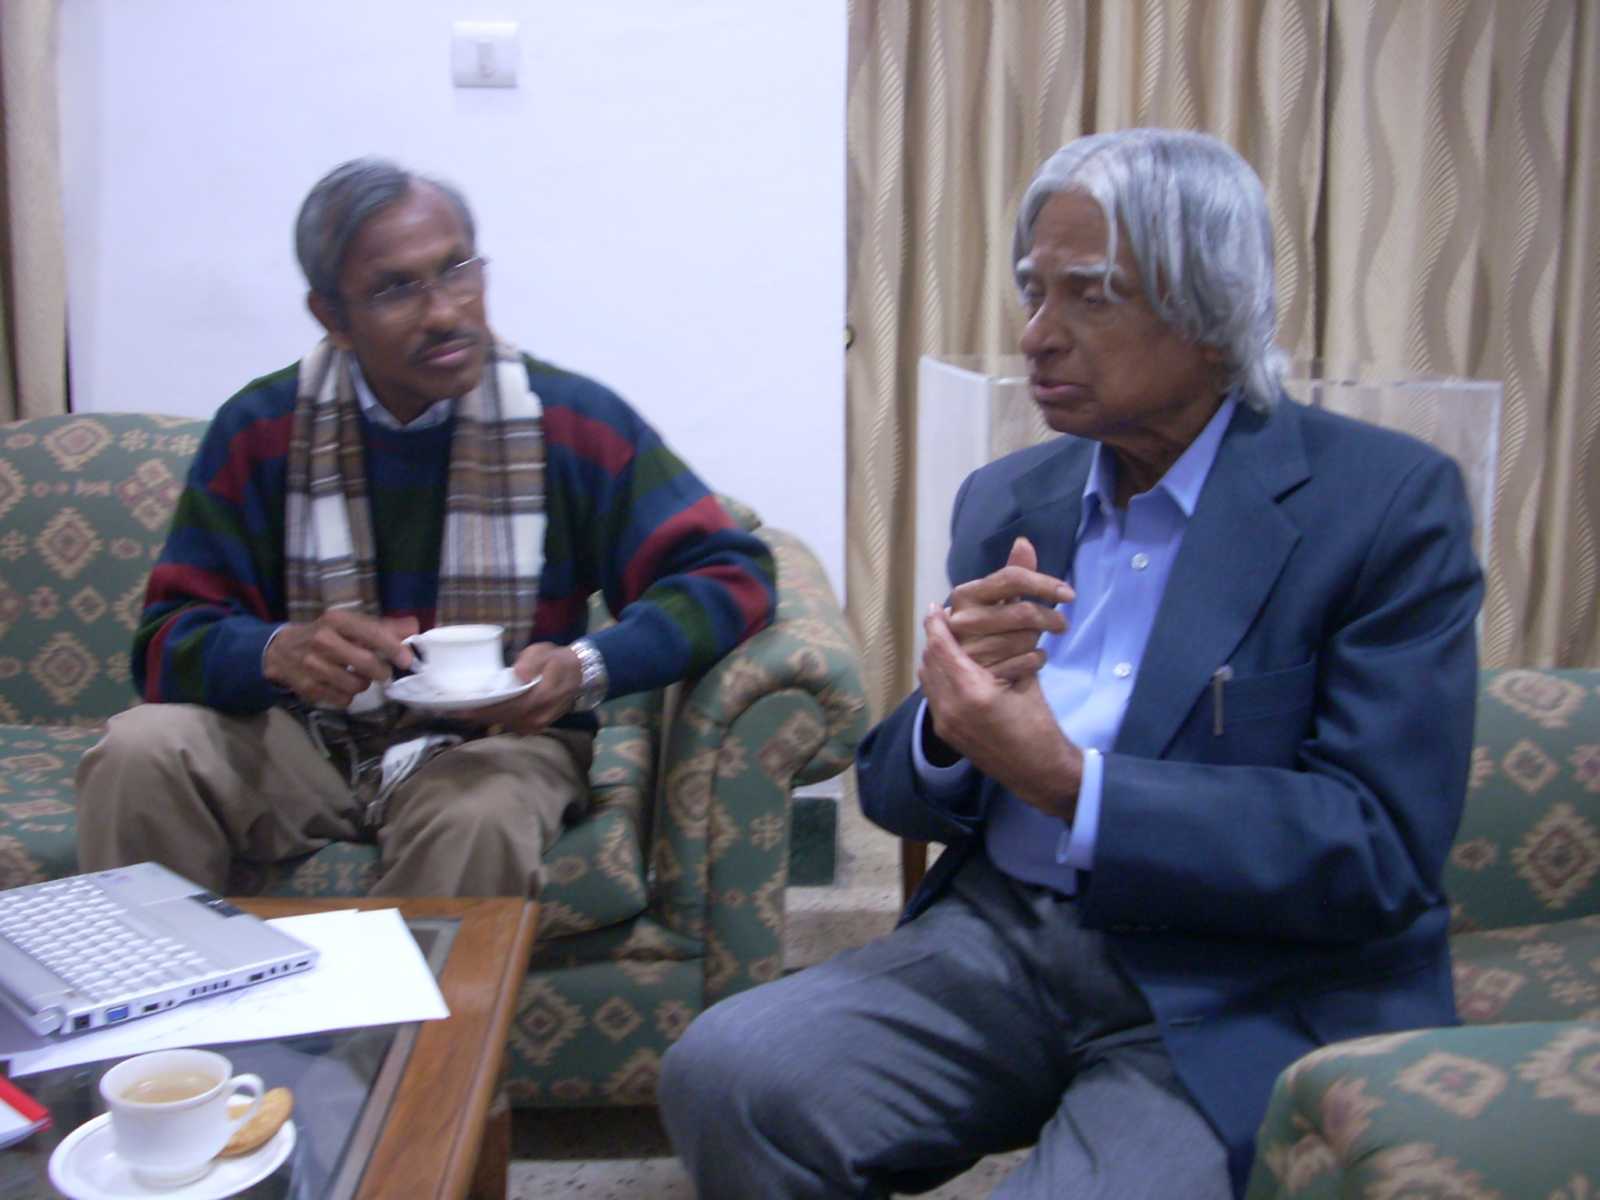 INO%20spokesperson%20N.K.Mondal%20discussing%20INO%20project%20with%20Dr.%20A.P.J.Kalam.JPG